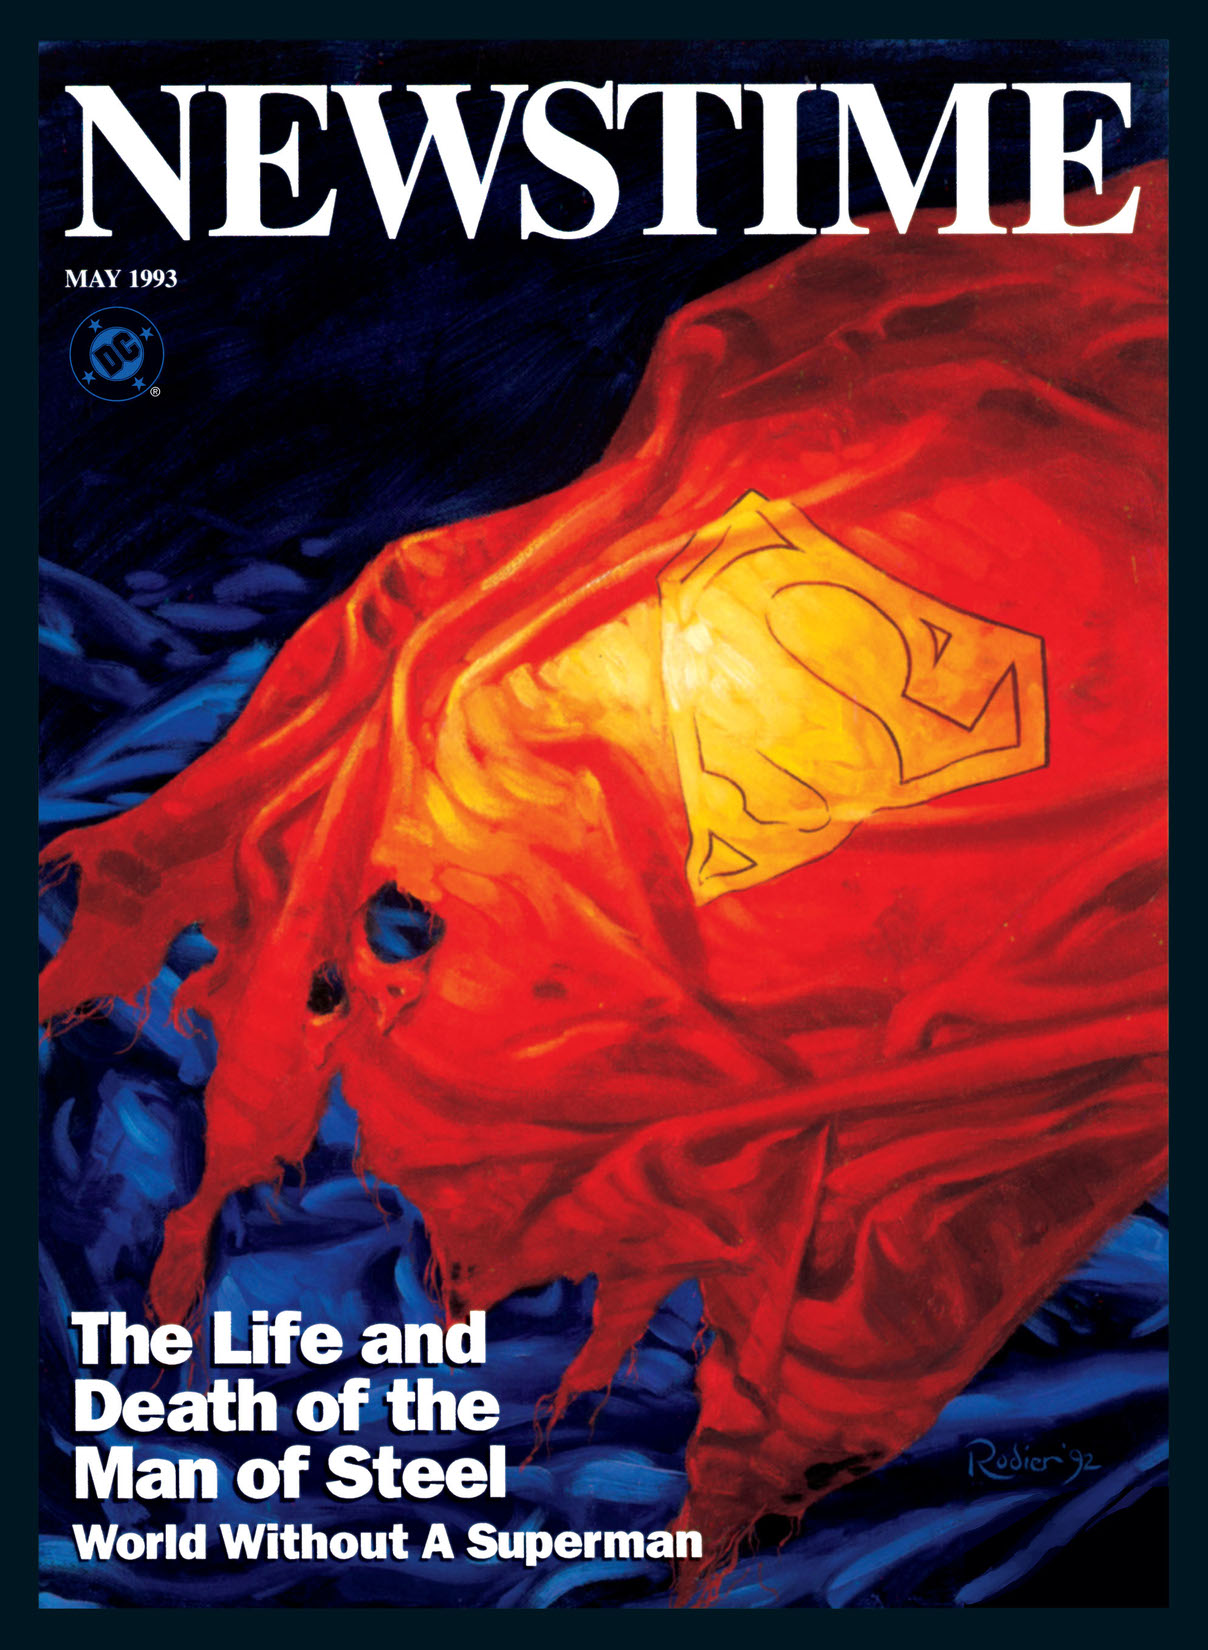 Newstime: The Life and Death of Superman #1 preview images